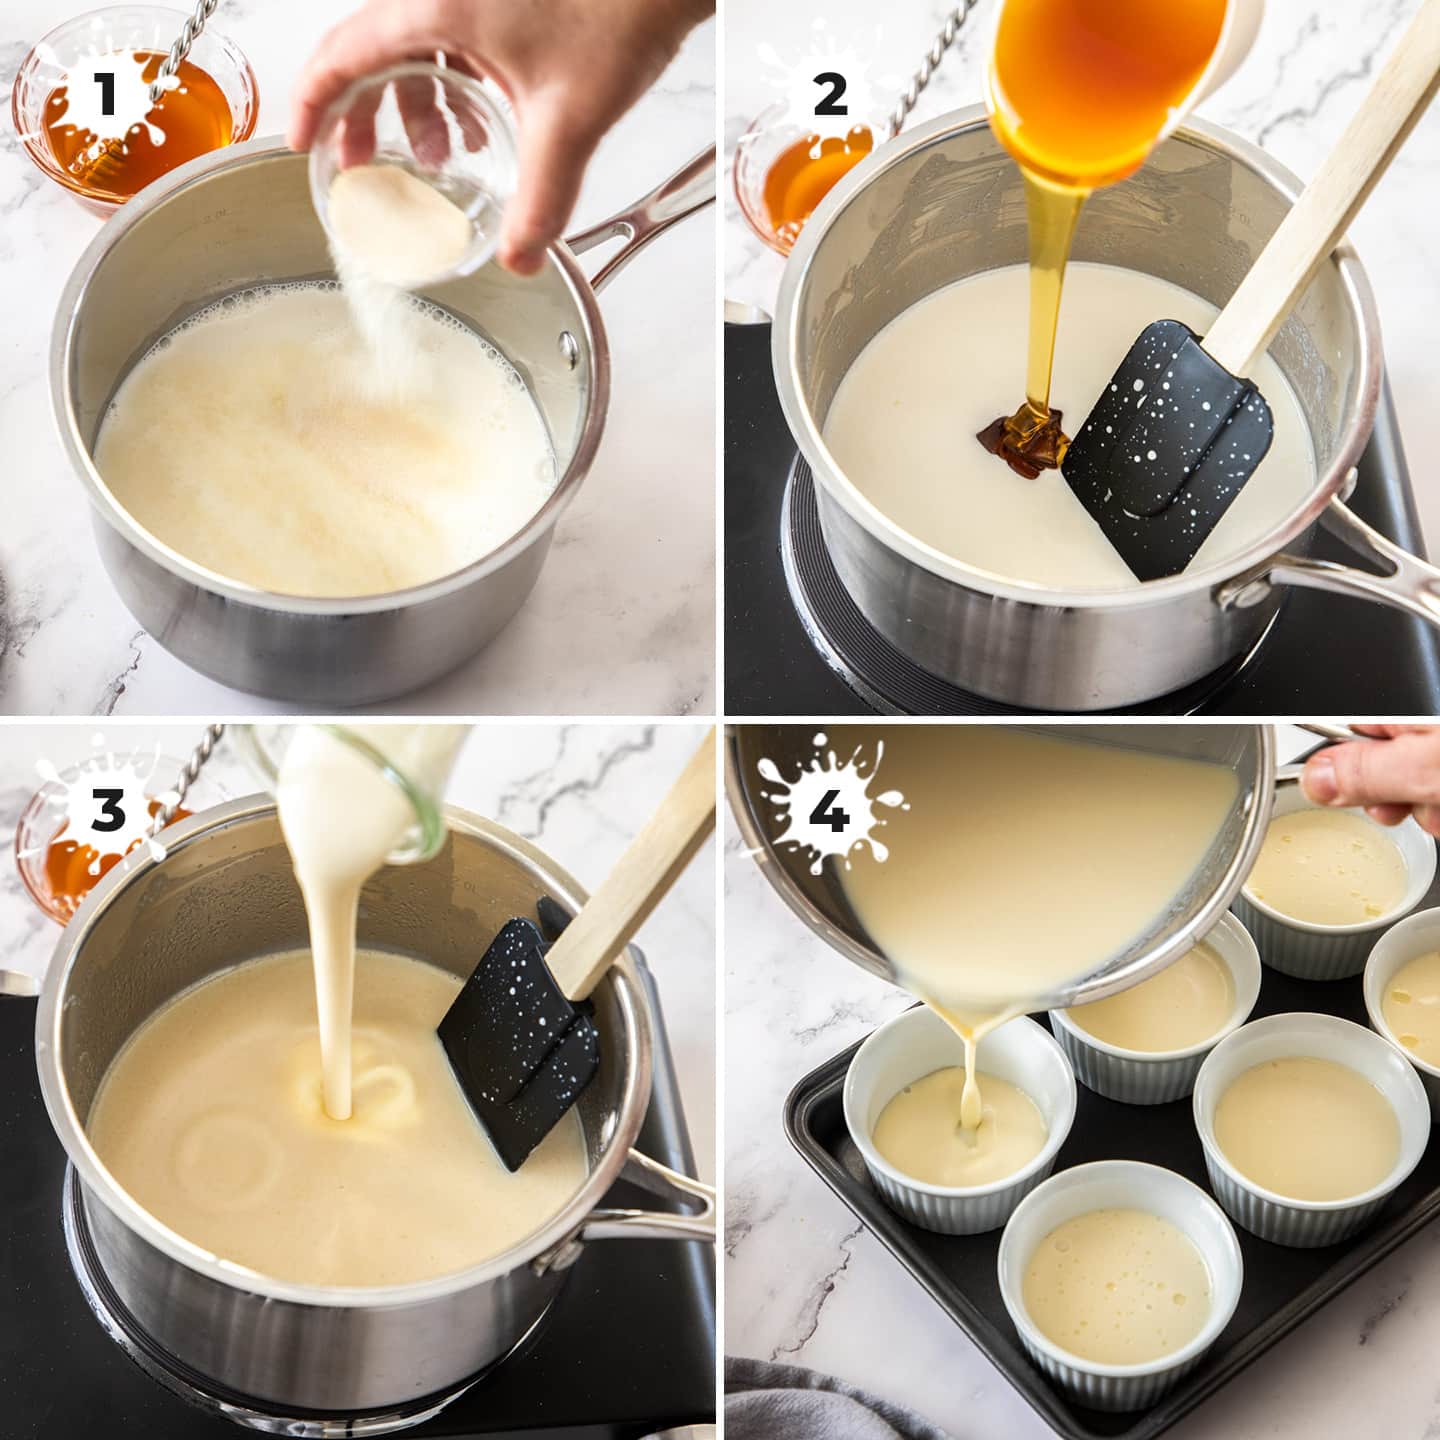 4 images showing how to make panna cotta.